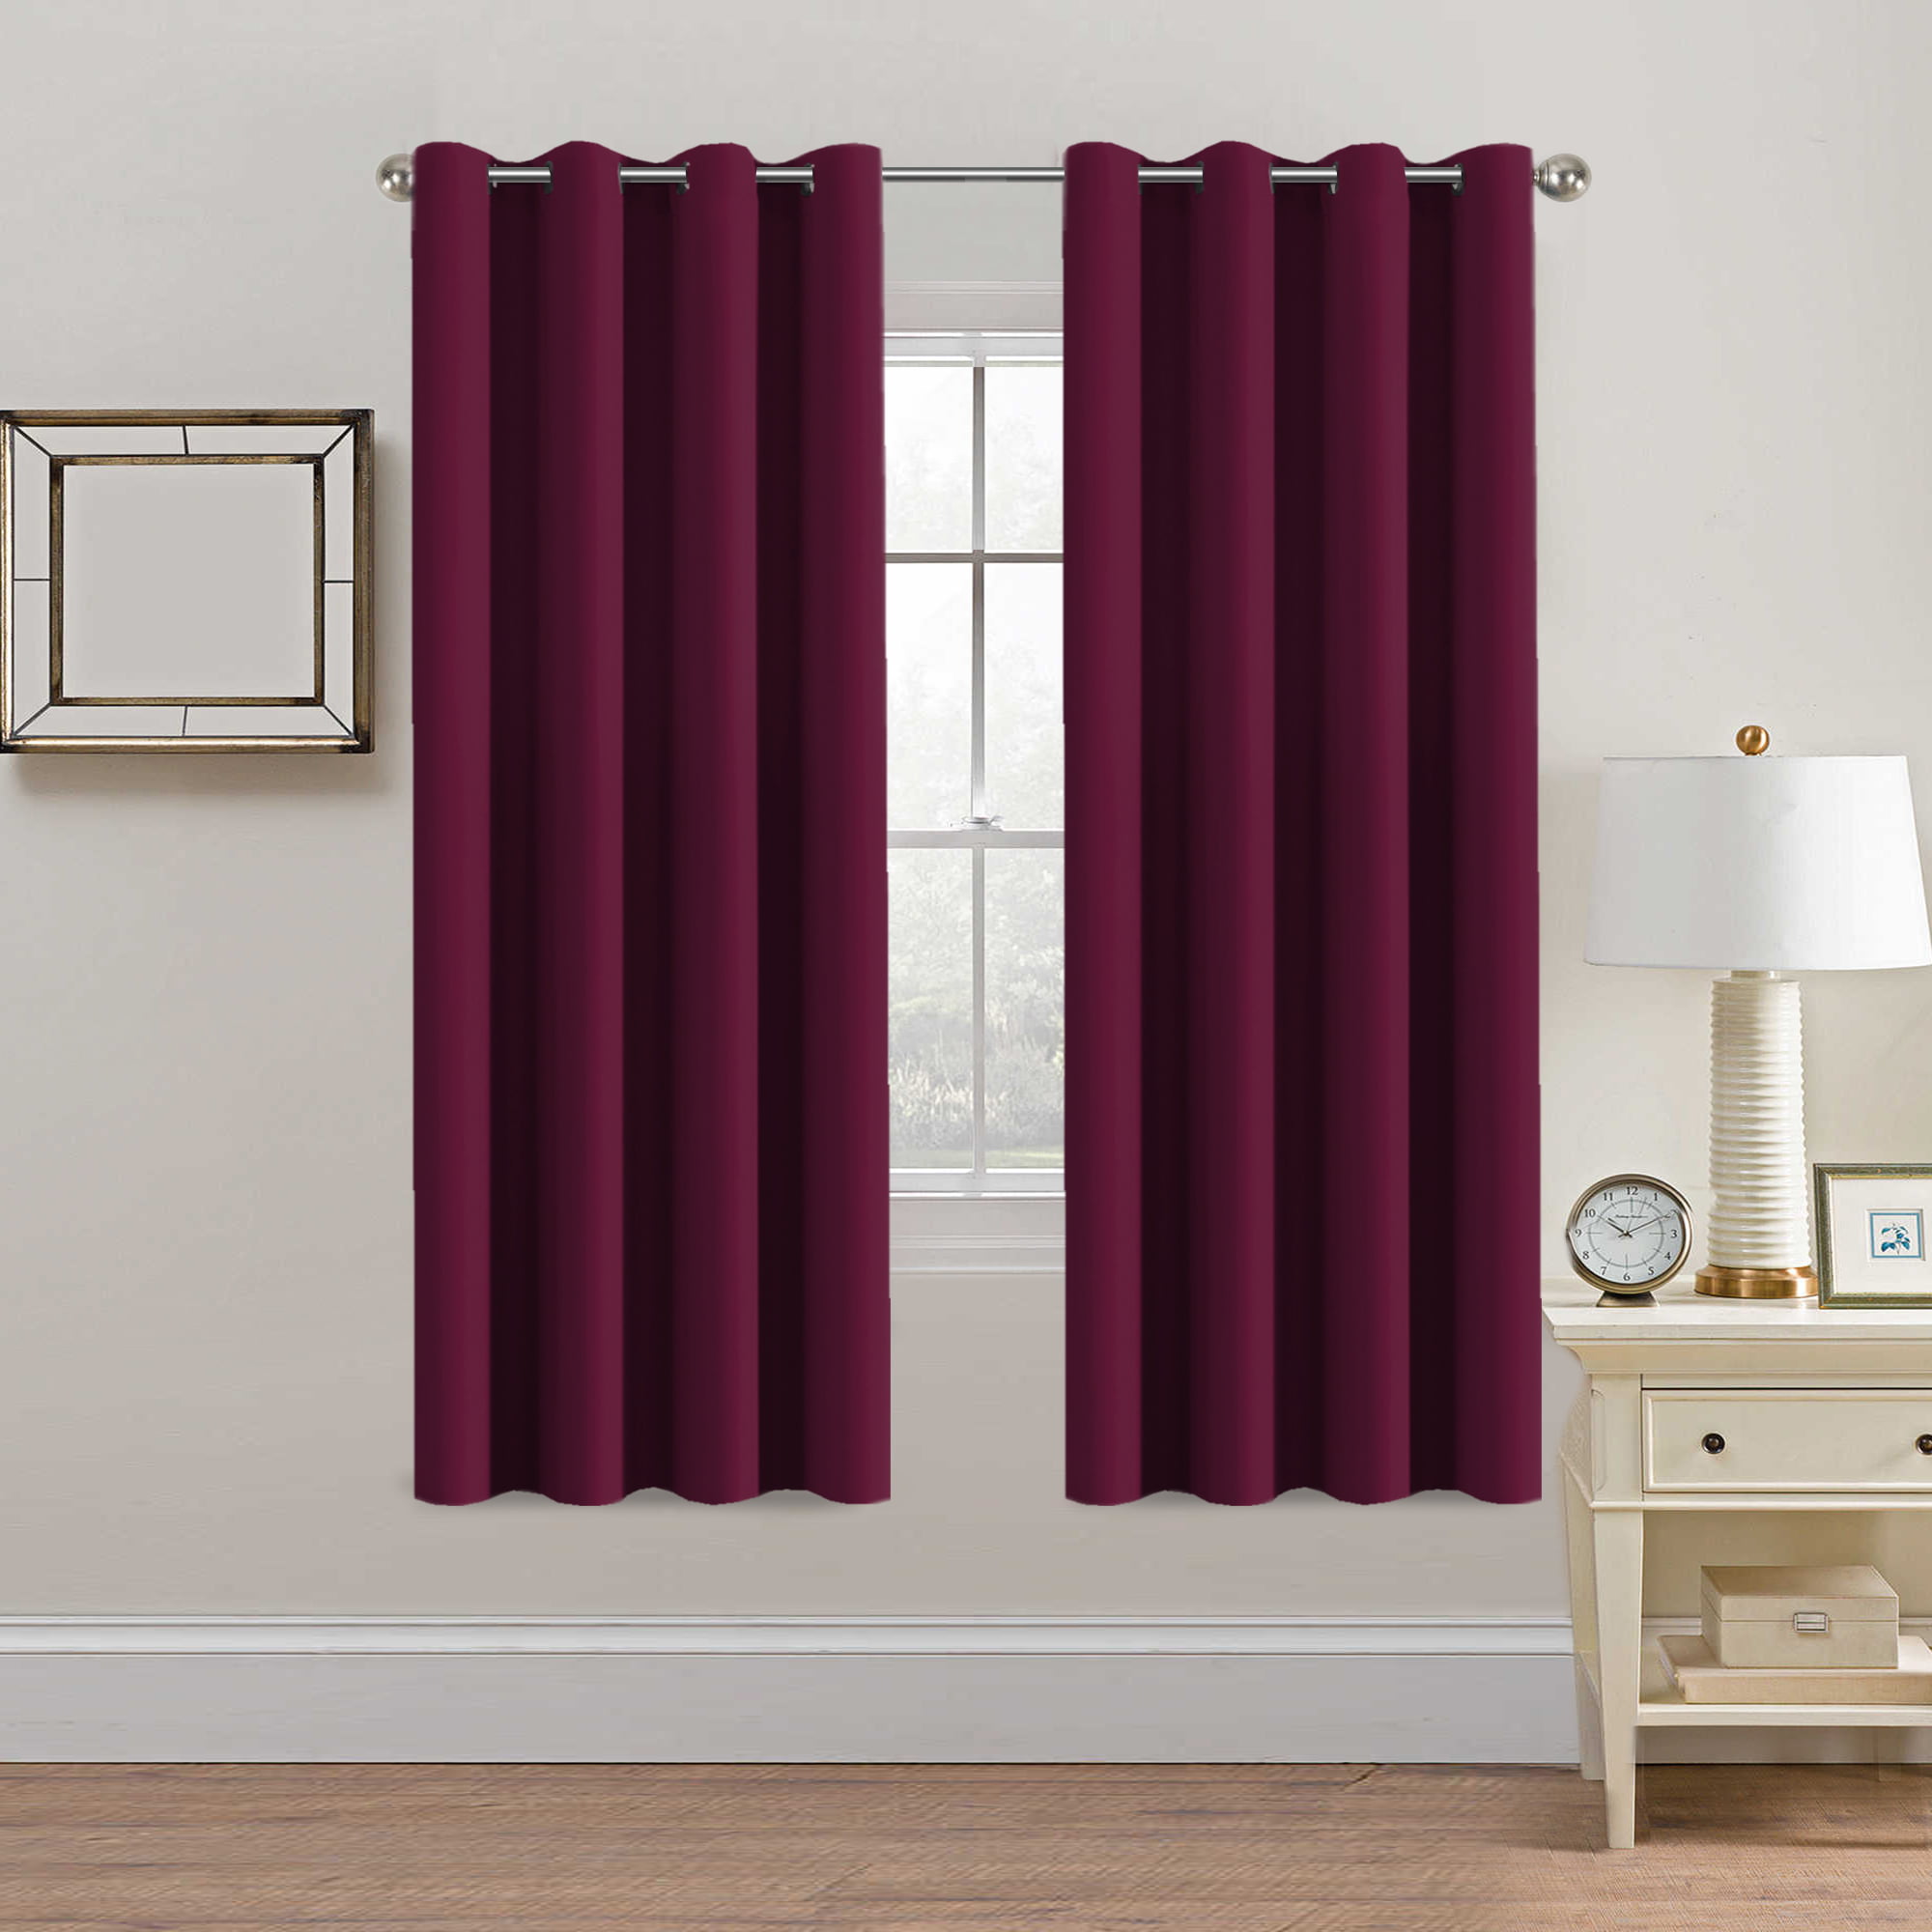 H.Versailtex Thermal Insulated Blackout Curtains - Antique Copper